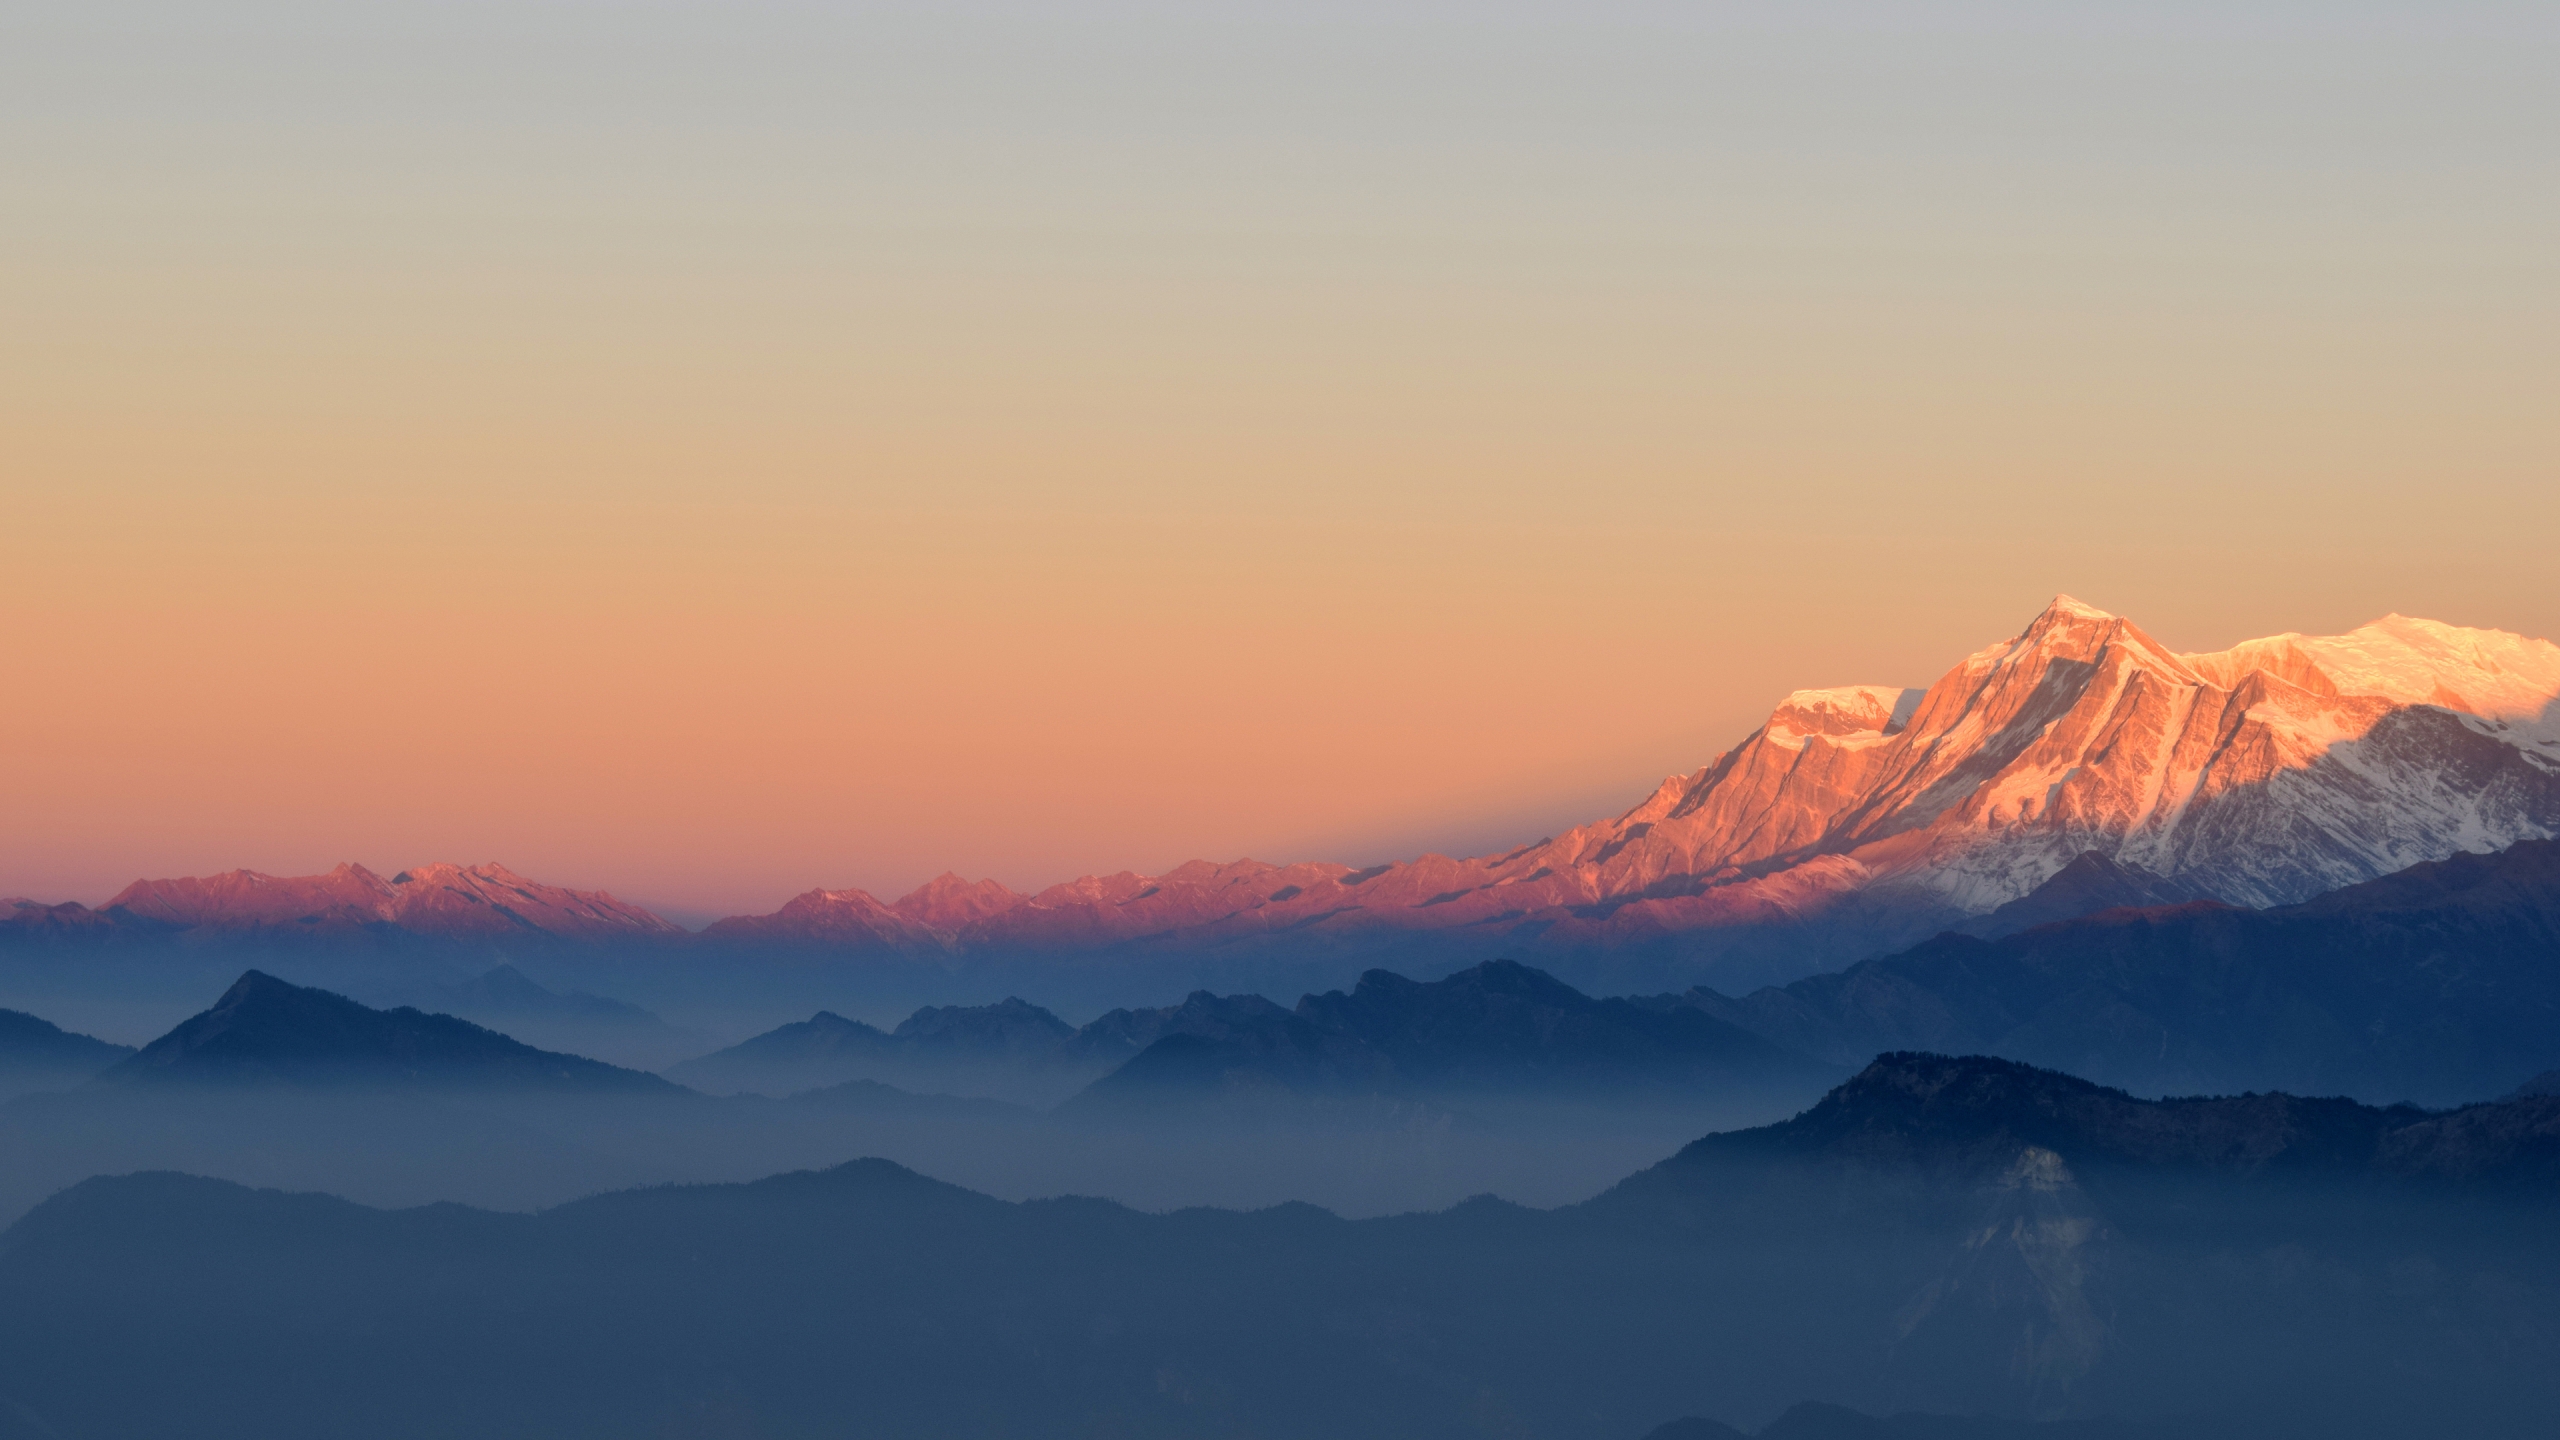 Minimal Mountains Tops for 2560x1440 HDTV resolution